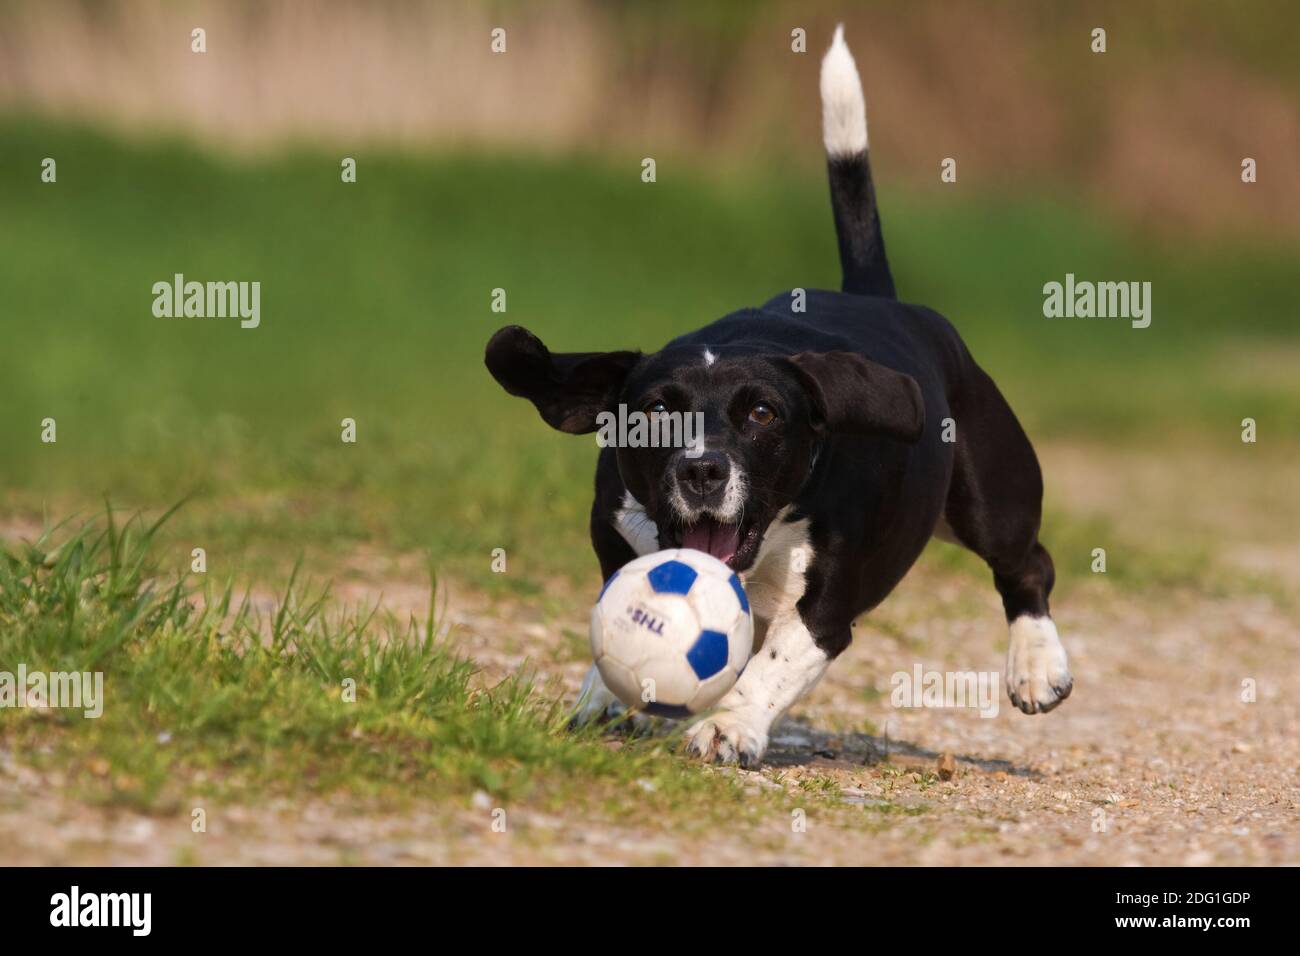 Jack Russell Terrier playing ball Stock Photo